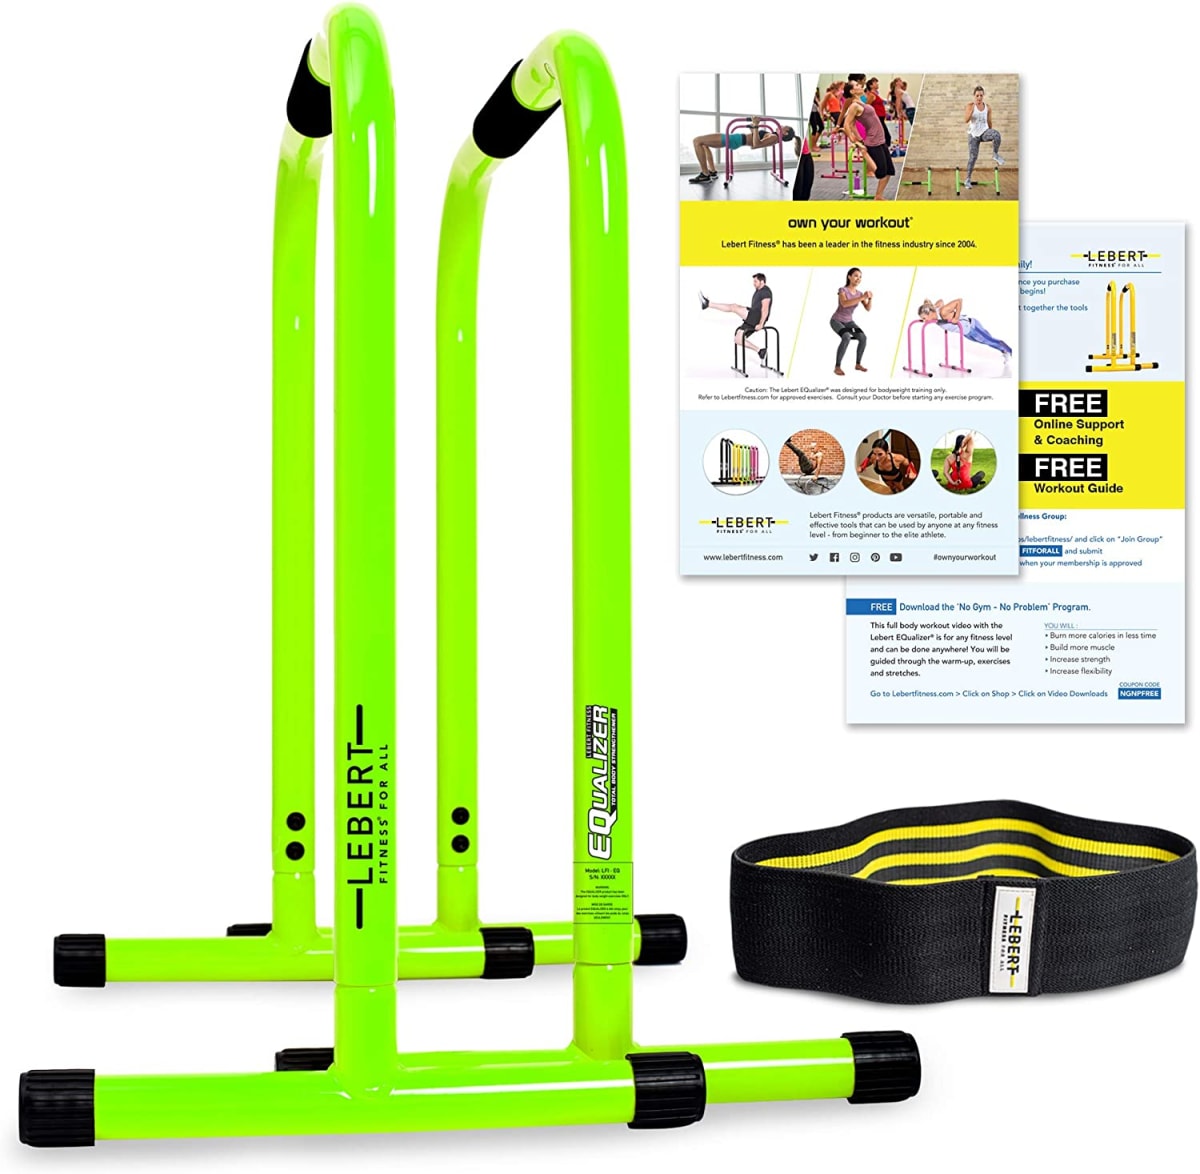 Dip Bar Stand - Original Equalizer Total Body Strengthener Pull Up Bar Home Gym Exercise Equipment Dipping Station - Hip Resistance Band, Workout Guide and Online Group